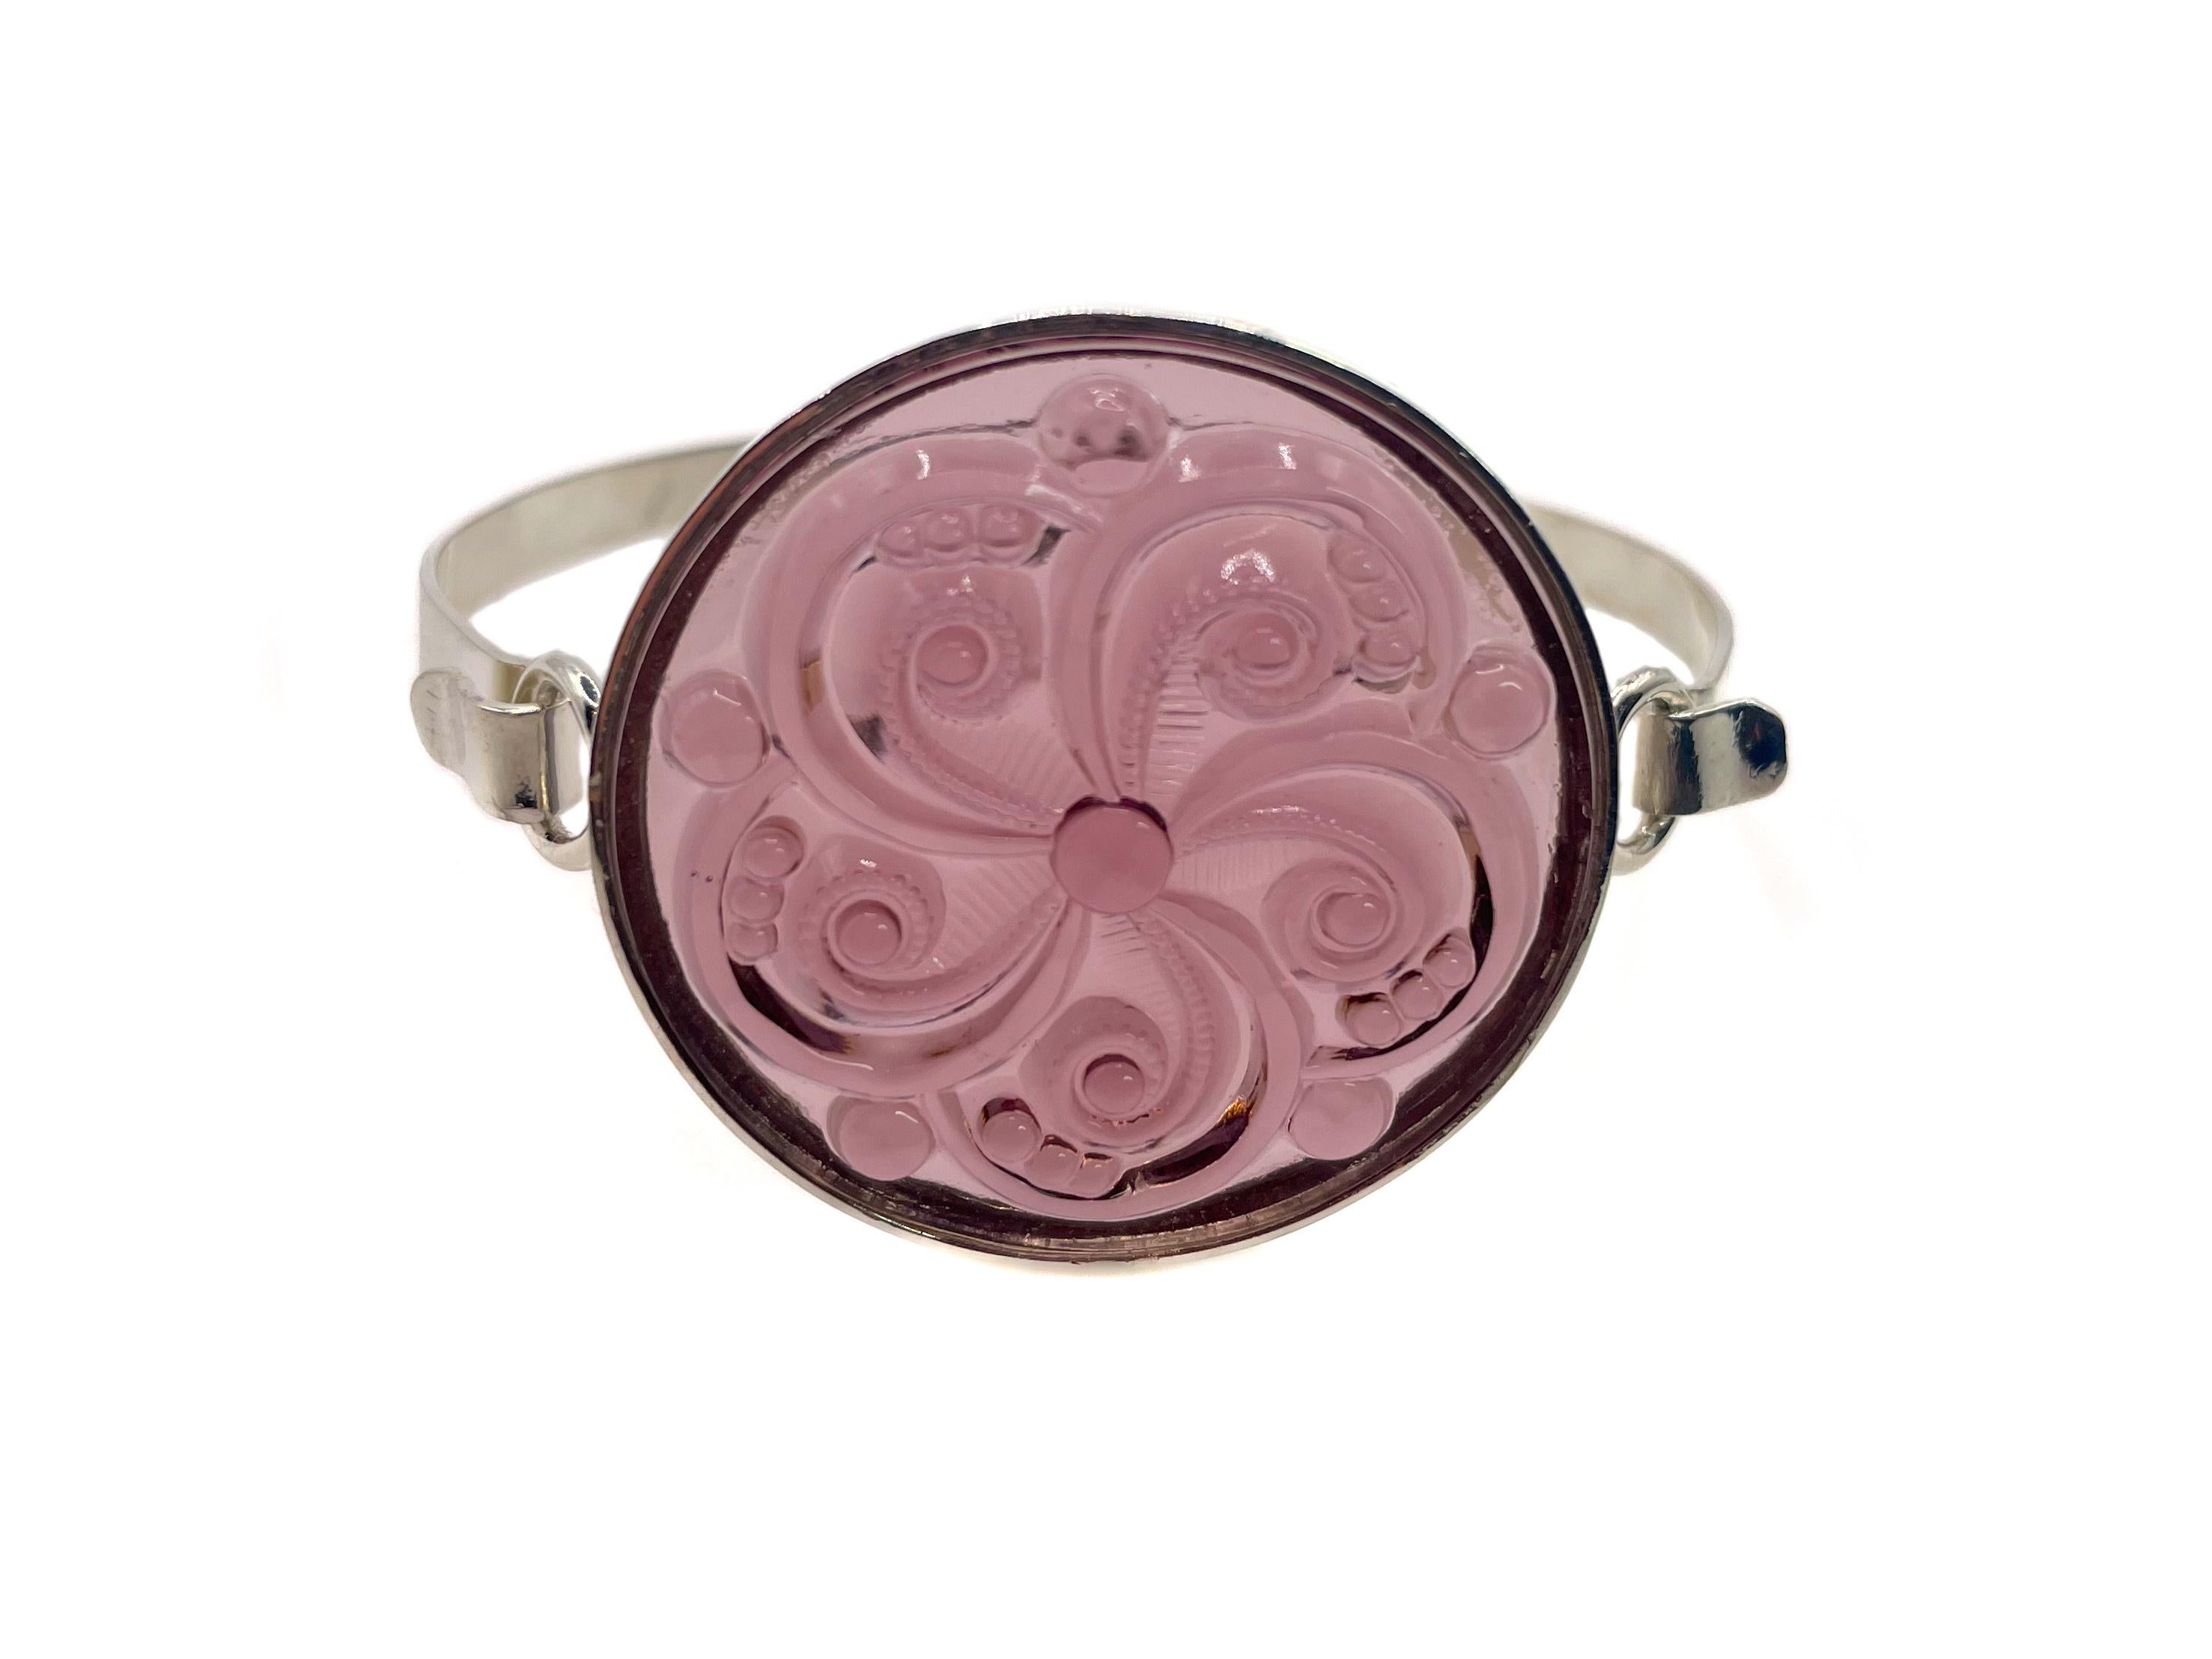 This refined bracelet, in the style of Lalique, showcases a light amethyst swirl motif glass cabochon from Germany. 

The round molded piece of glass is set in a NEW sterling silver setting. It has an elegant and effortless hook clasp. The glass